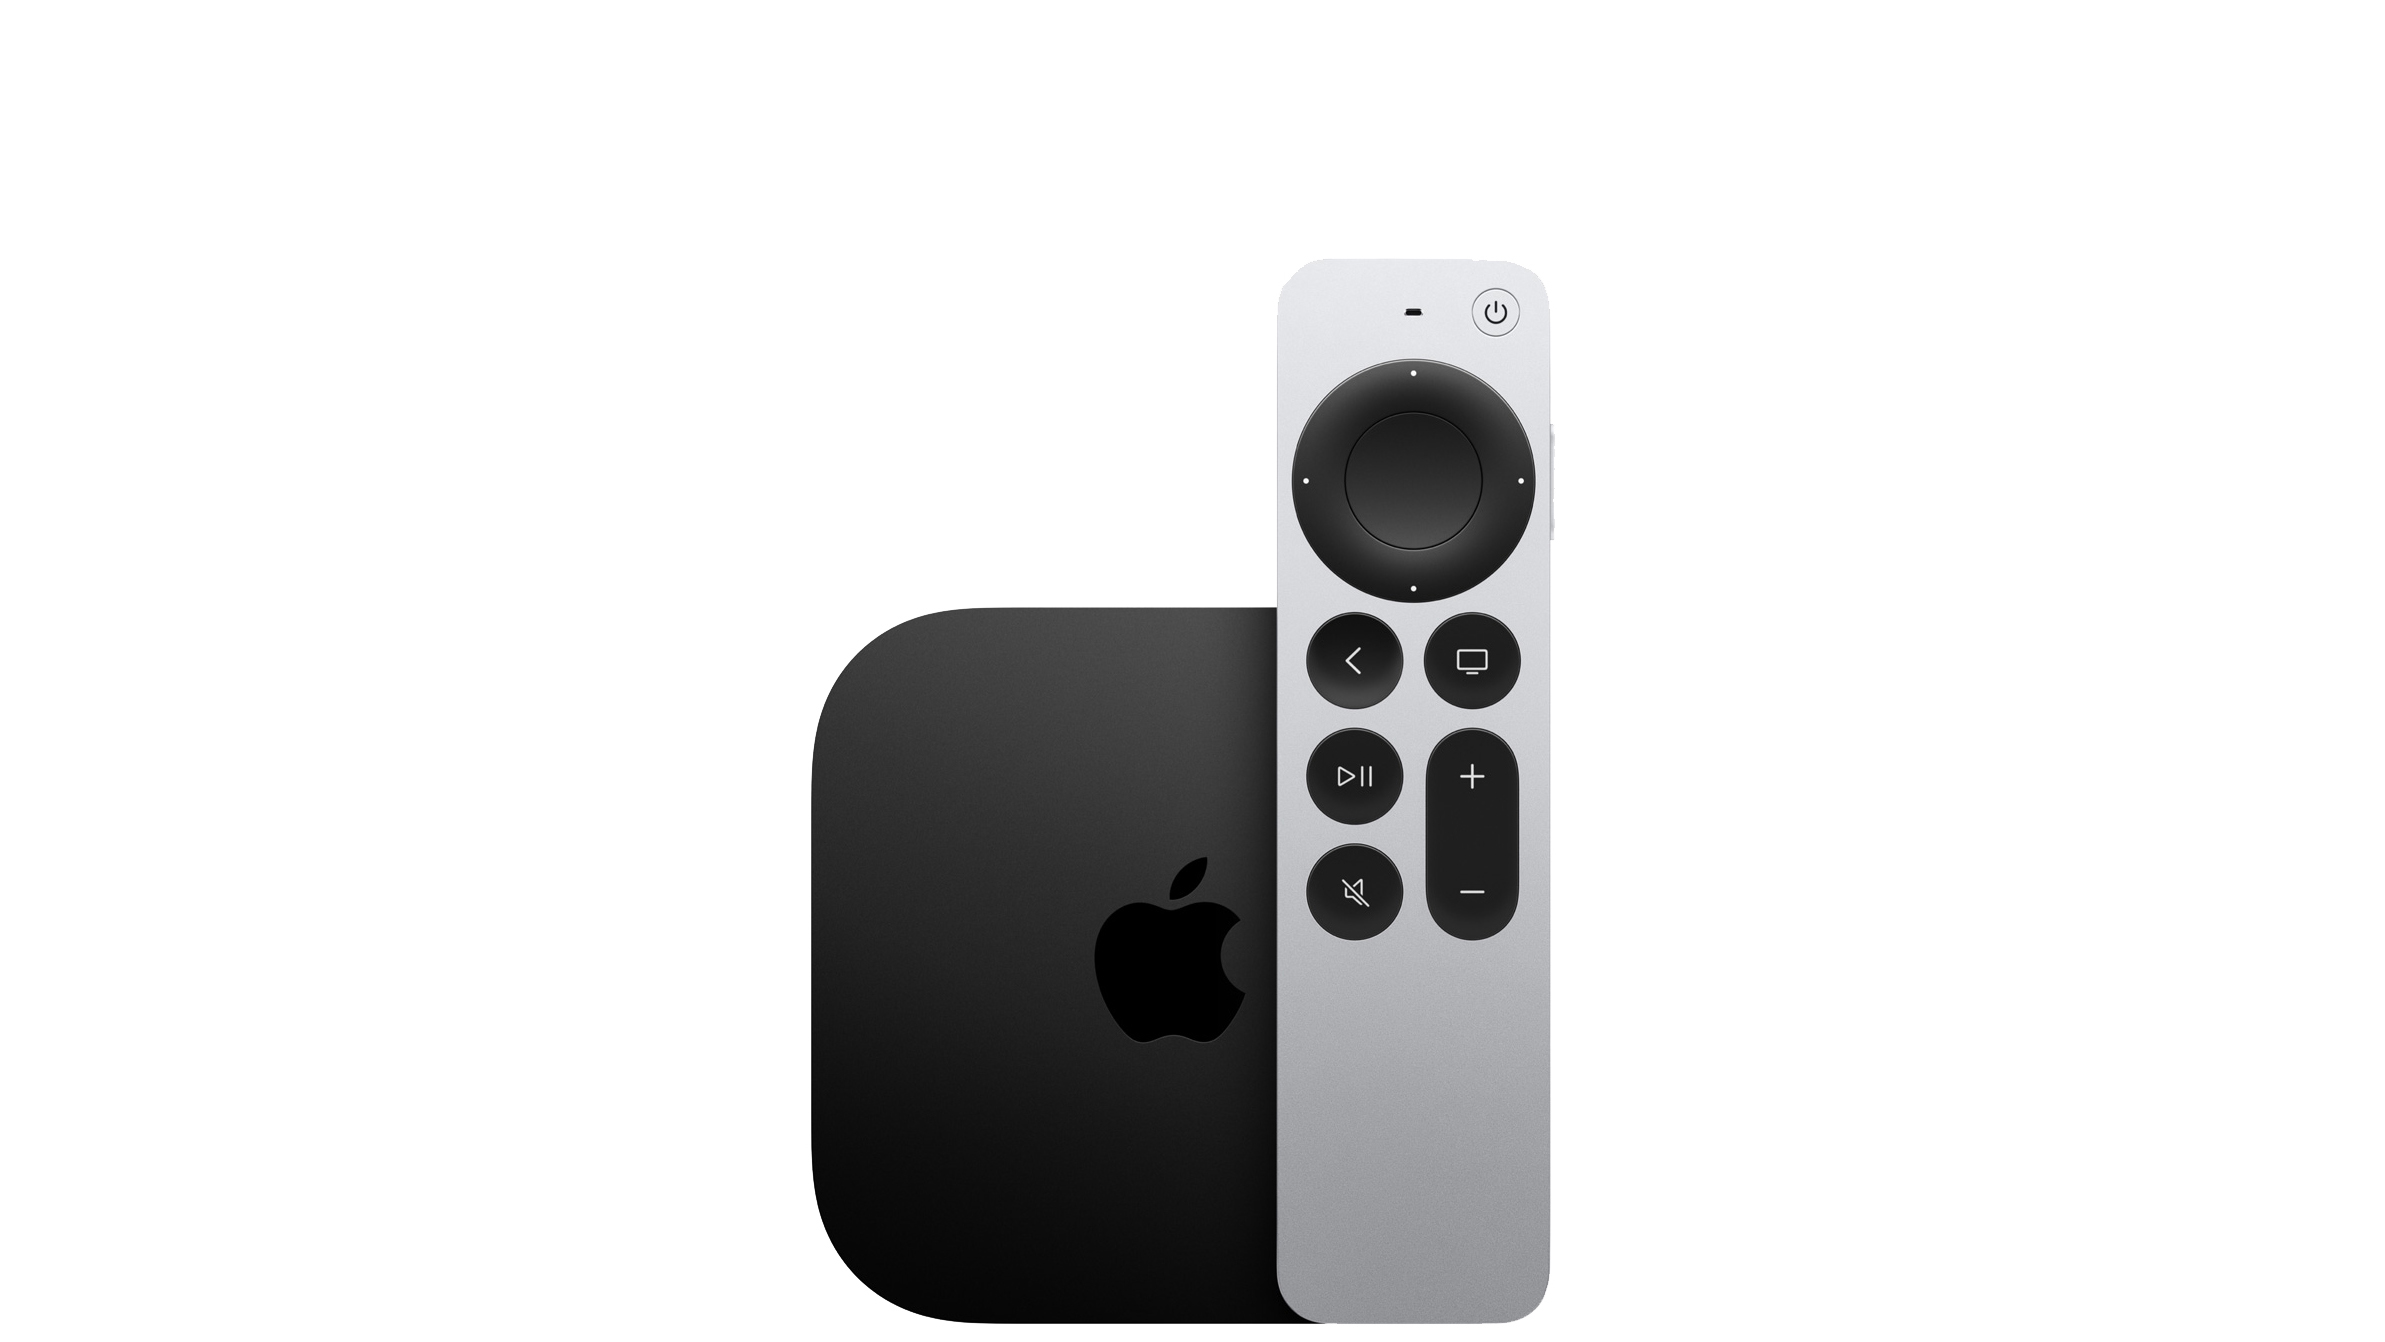 The Apple TV 4K (2022) and remote on a white background